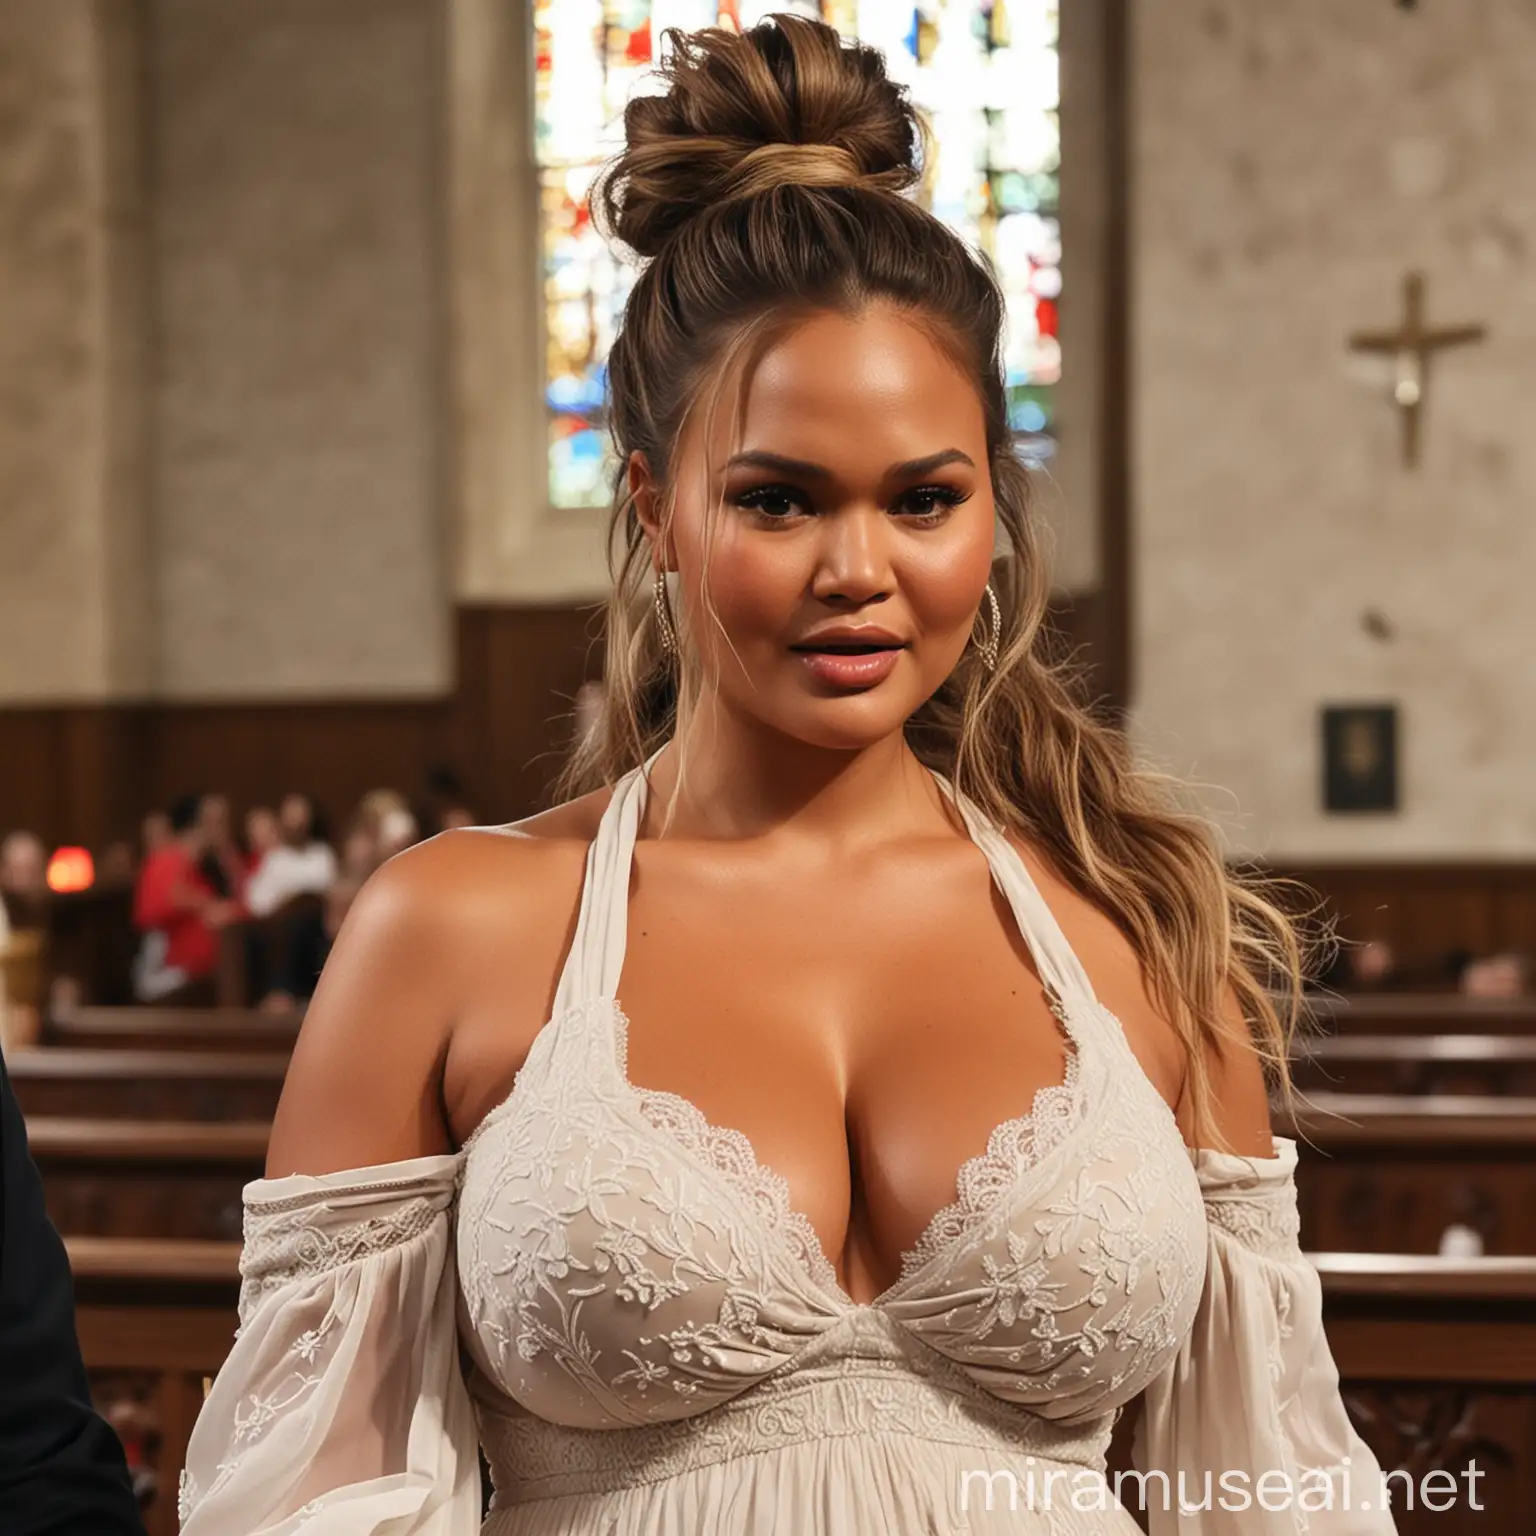 Chrissy Teigen Pregnant in Church Big Belly and Bold Style